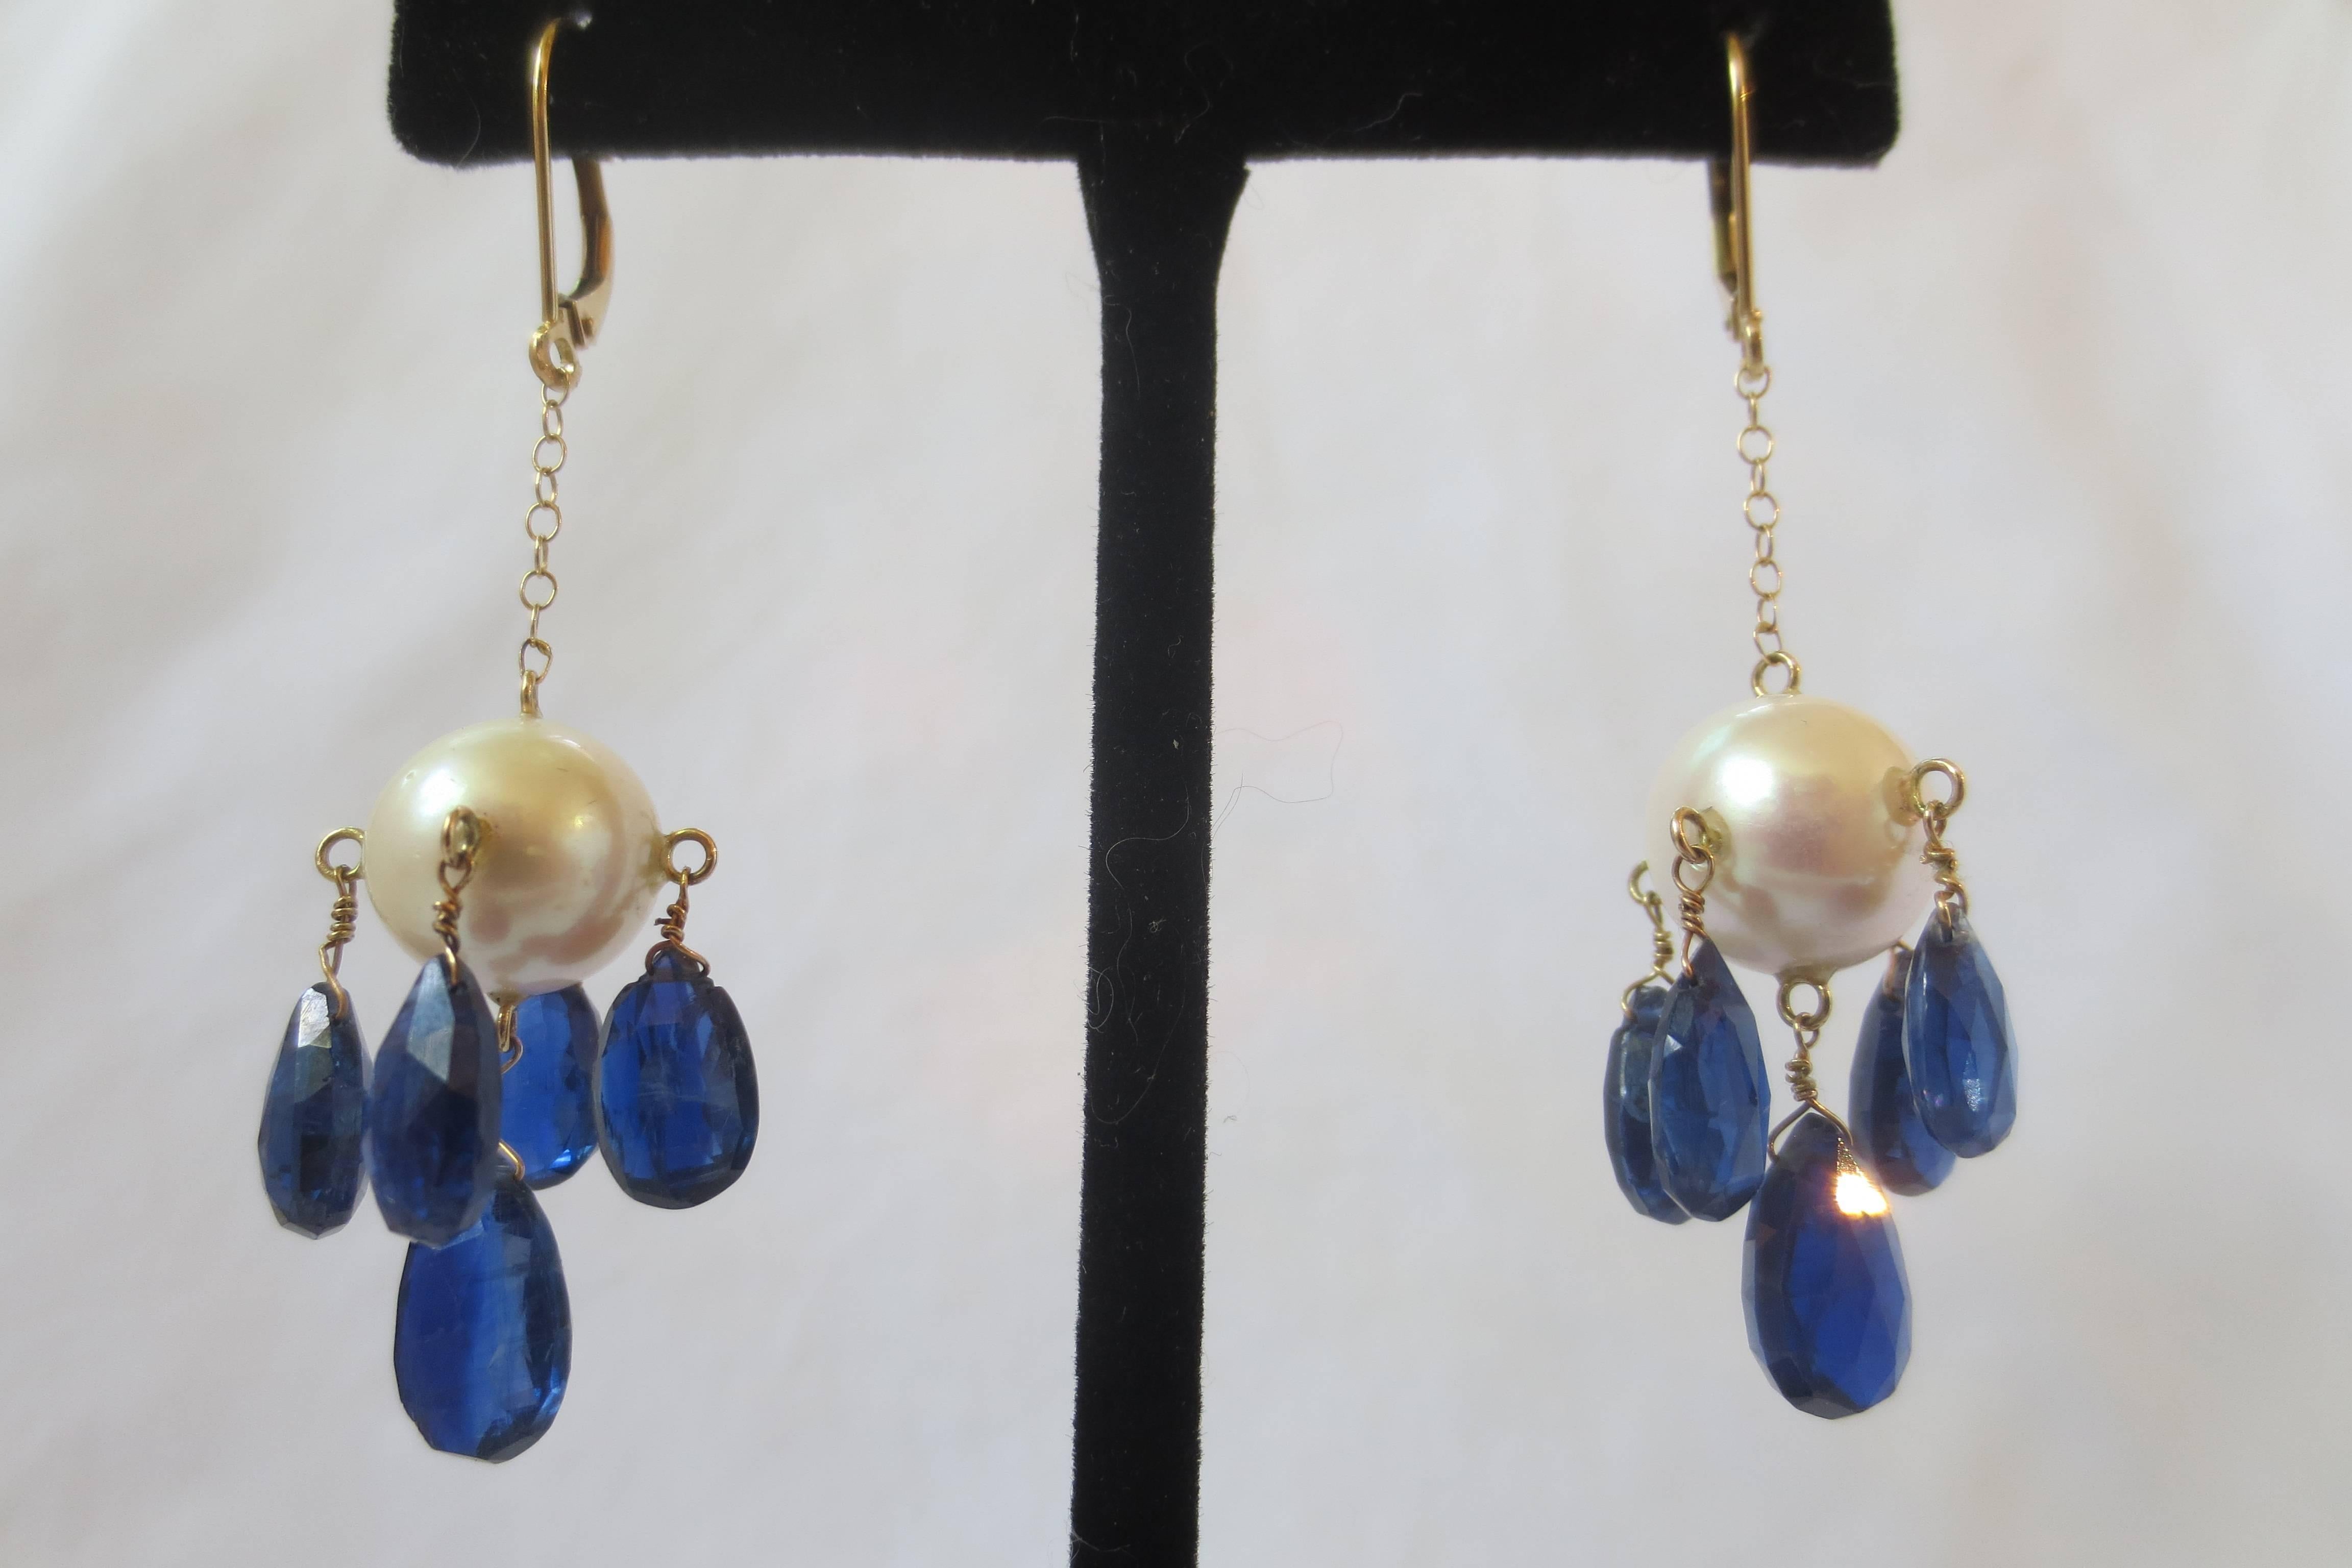 A large 10 mm round pearl is fitted with five kyanite, teardrop briolettes from gold findings. The briolettes are deep and lush, with a very rich, translucent blue that emanates from within. The whole earring is 2.25 inches long and dangles from a